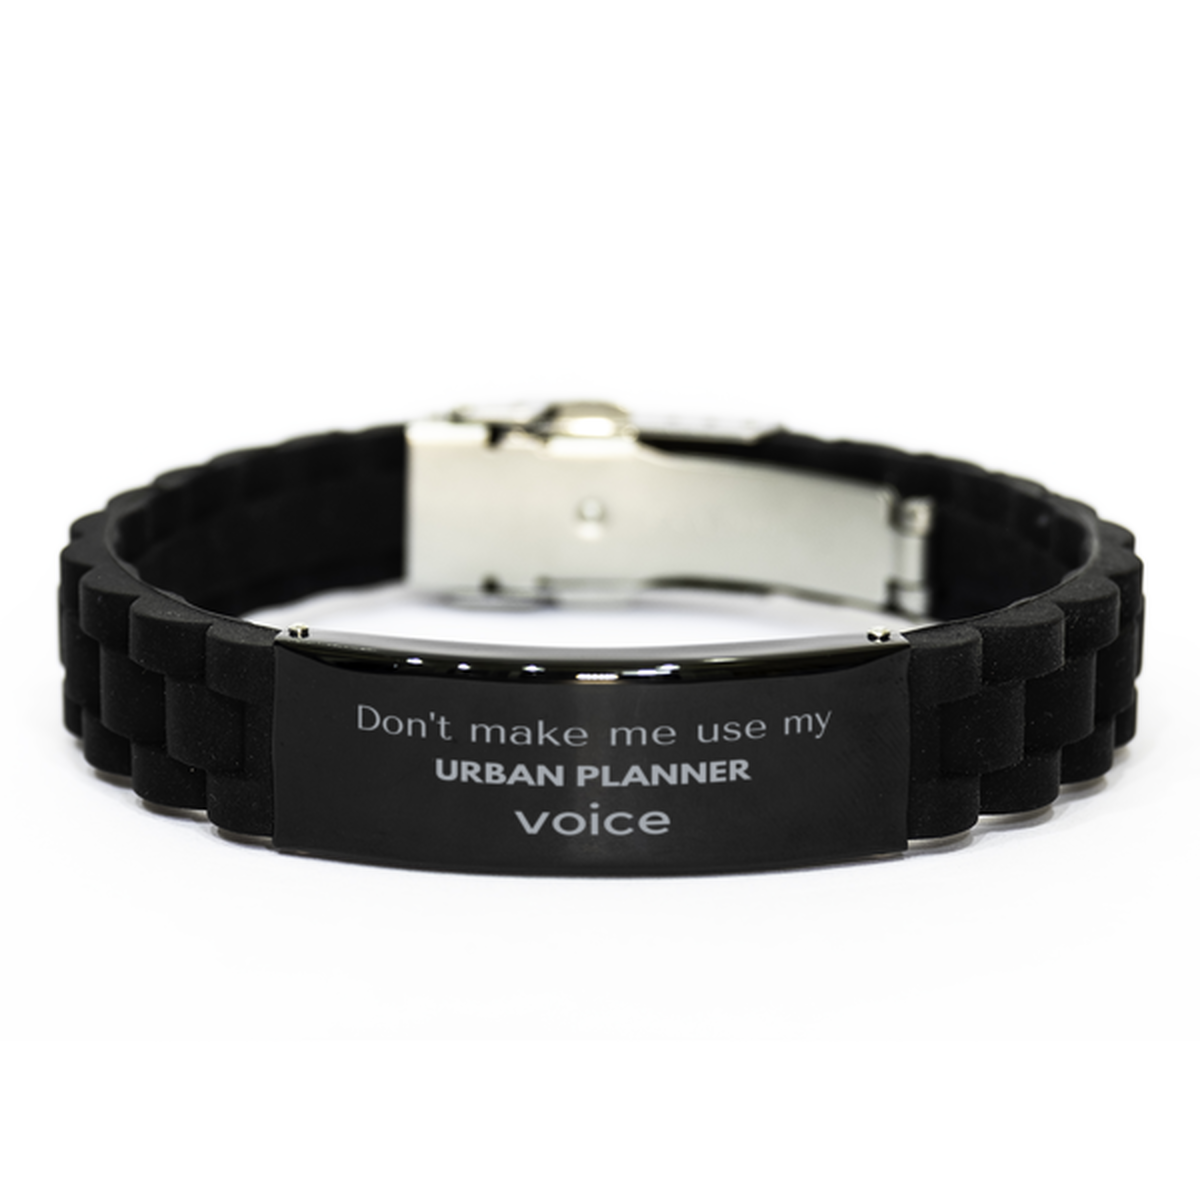 Don't make me use my Urban Planner voice, Sarcasm Urban Planner Gifts, Christmas Urban Planner Black Glidelock Clasp Bracelet Birthday Unique Gifts For Urban Planner Coworkers, Men, Women, Colleague, Friends